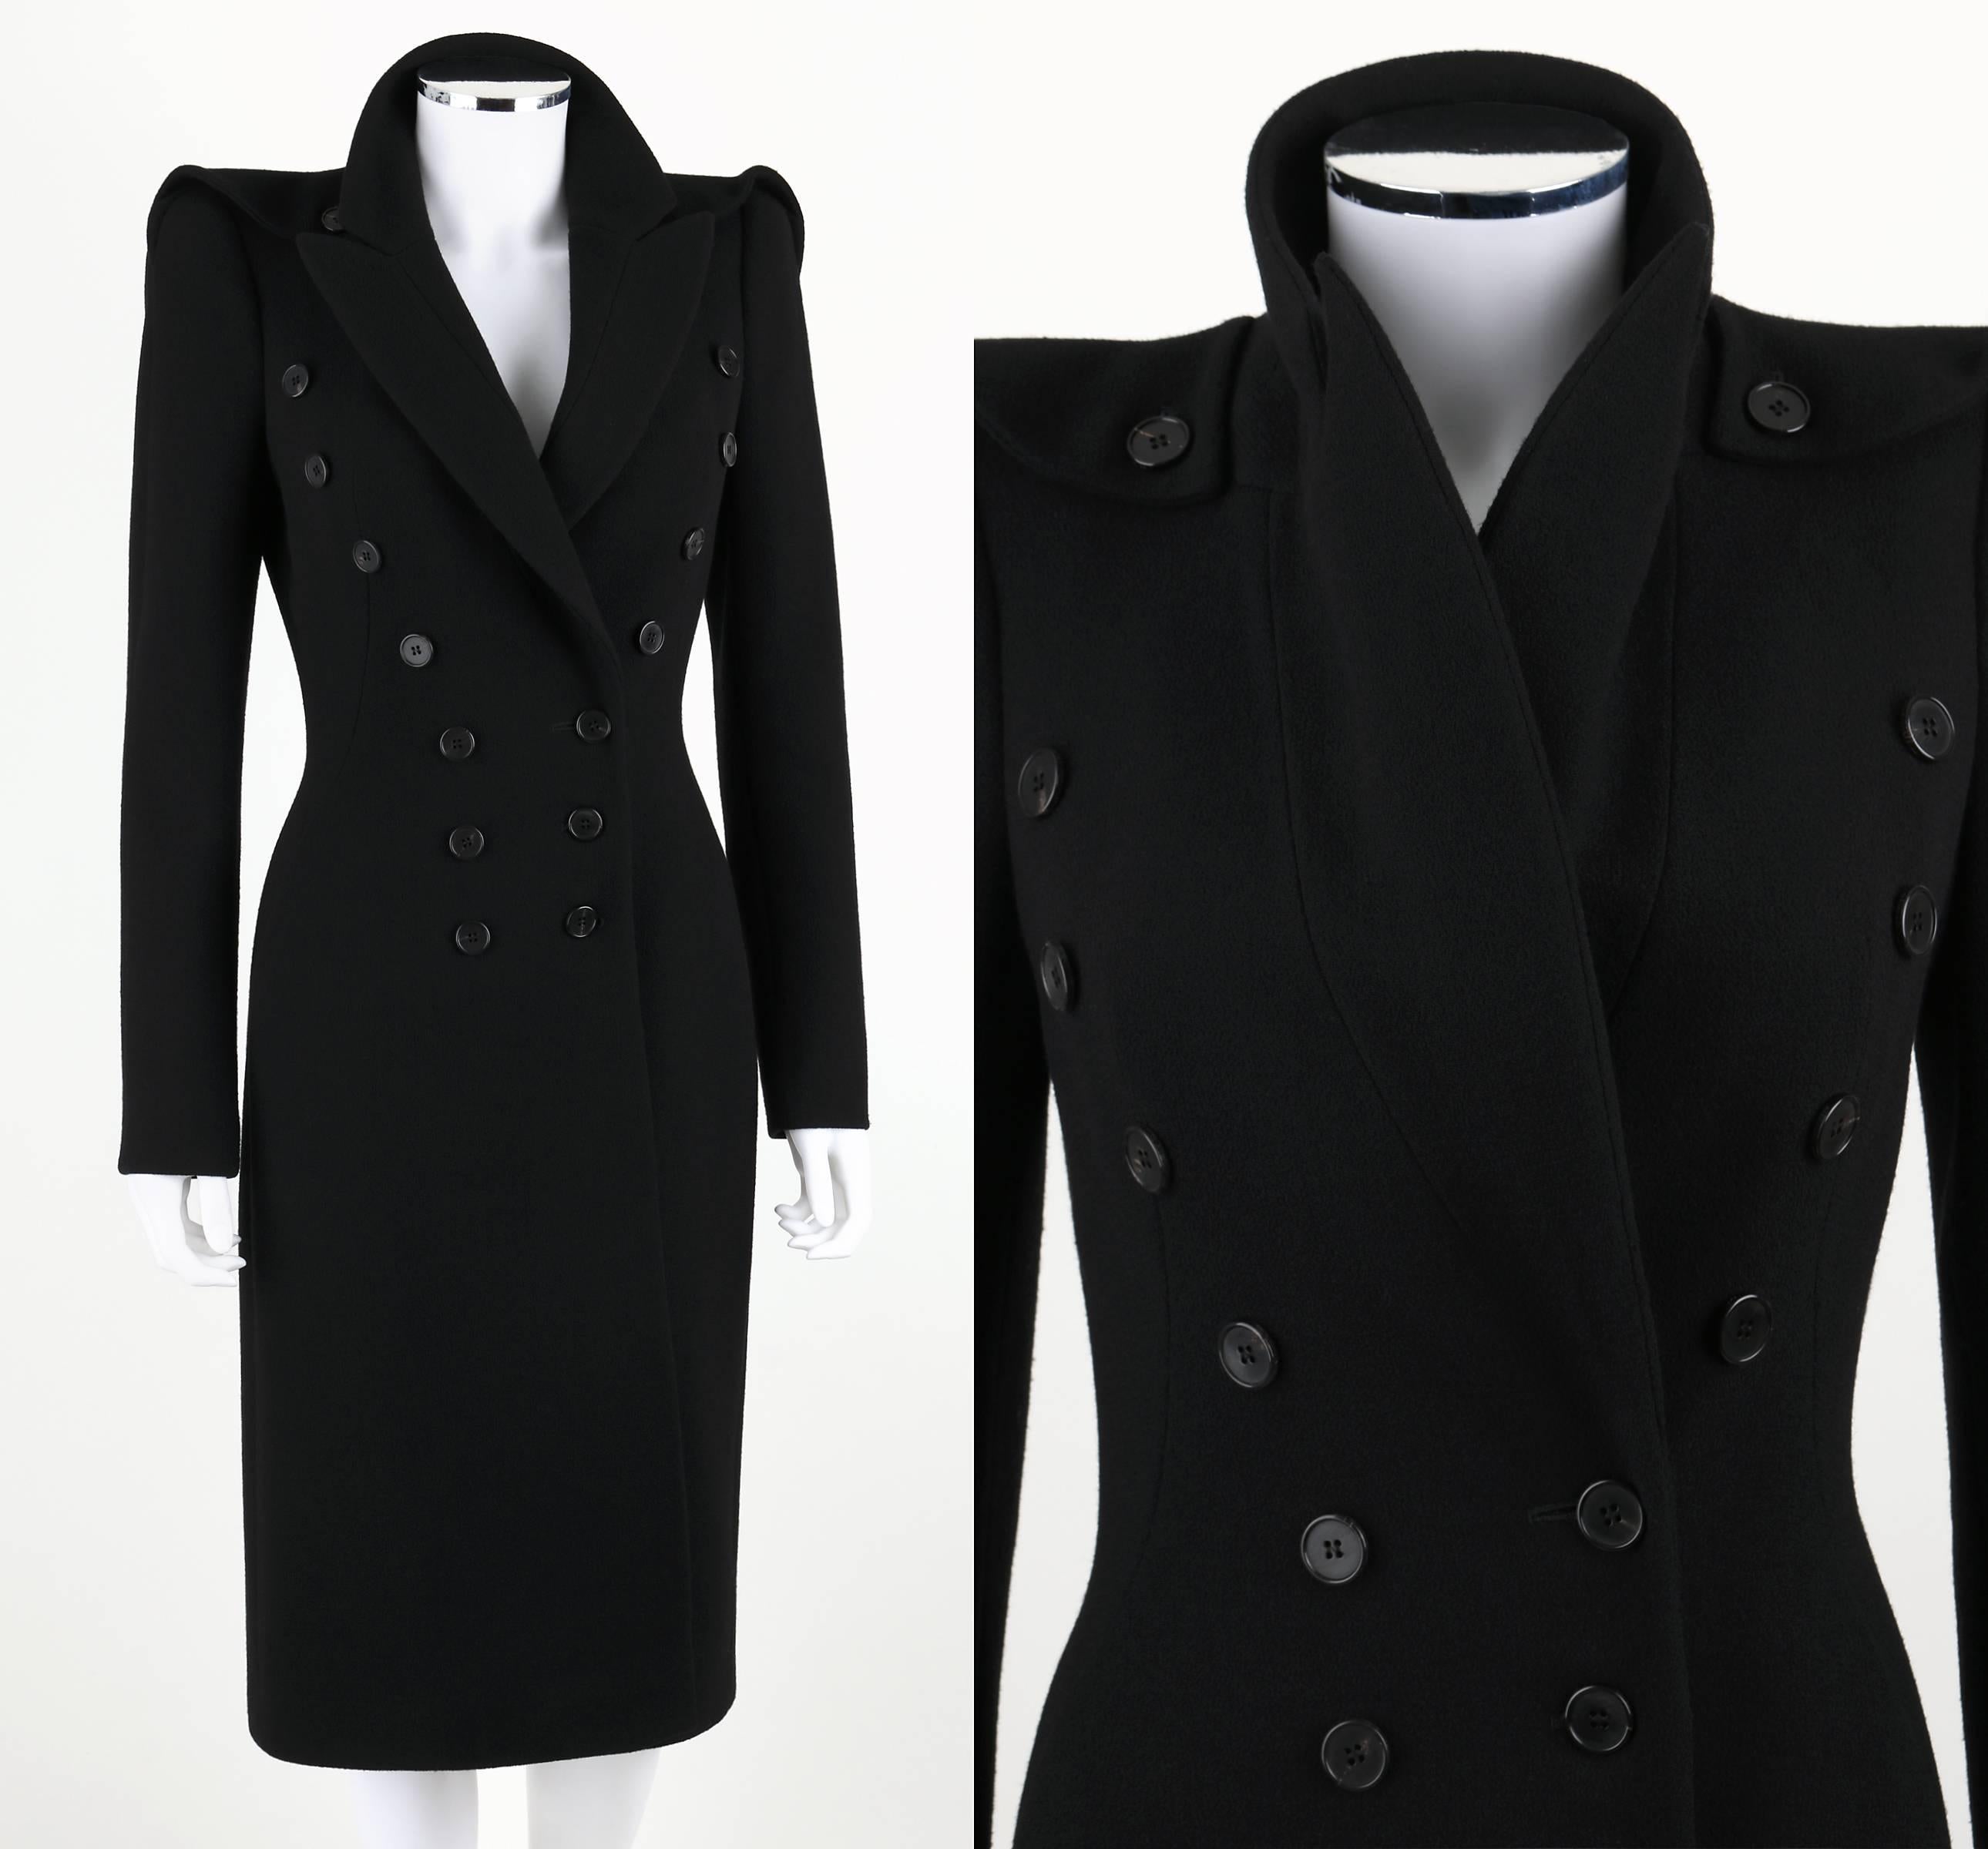 Alexander McQueen black wool crepe tailored military inspired coat from the Pre-Fall 2011 Collection. Double breasted button closure. Tailored collar/lapel. Padded shoulders with button epaulette detail. Button detail at cuffs. Two pockets. Button